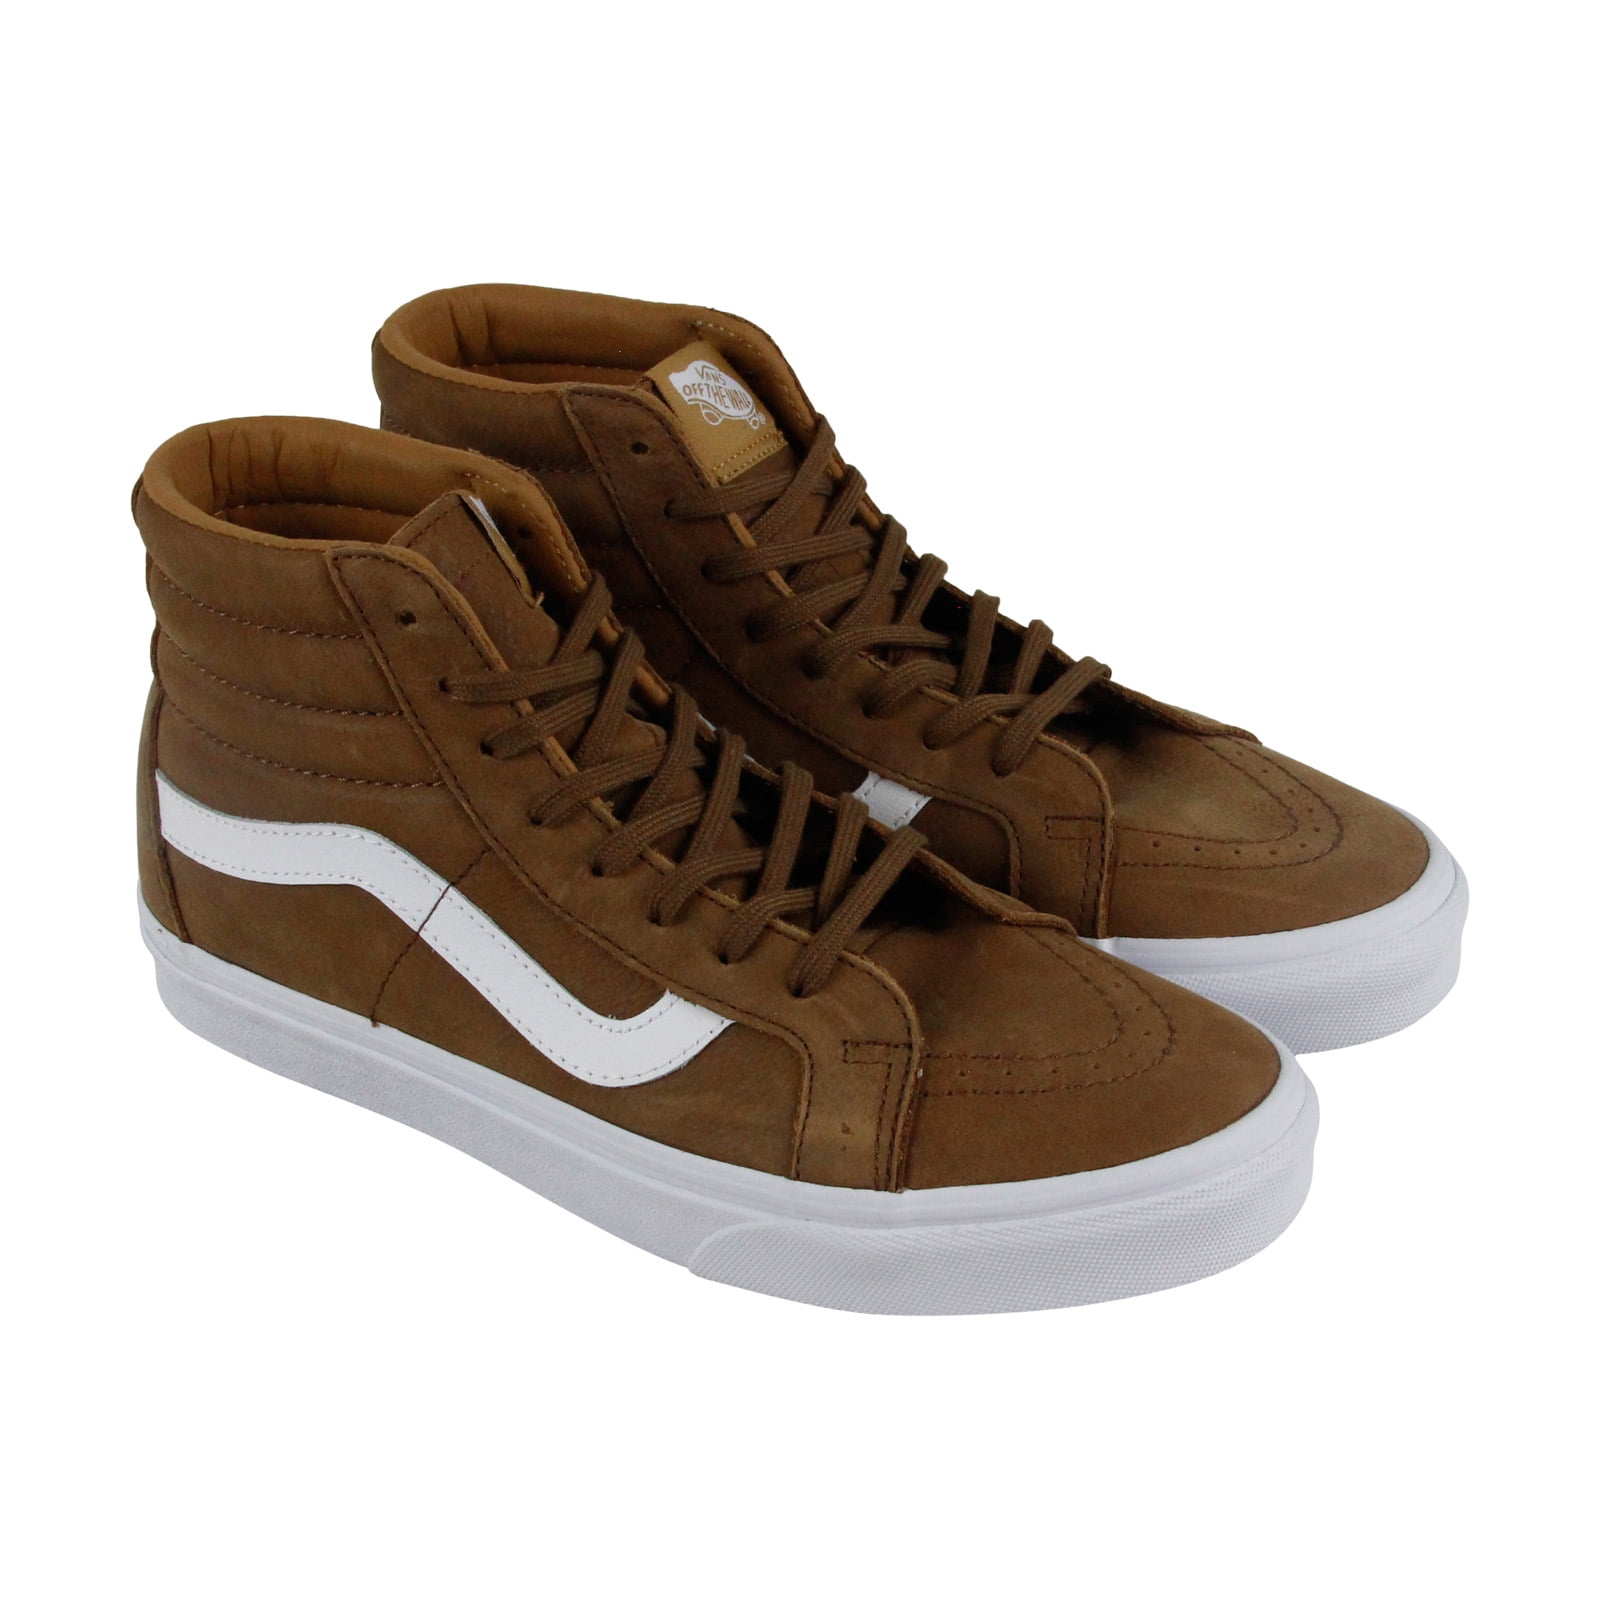 Vans Sk8 Hi Reissue Mens Brown Leather High Top Lace Up Sneakers Shoes